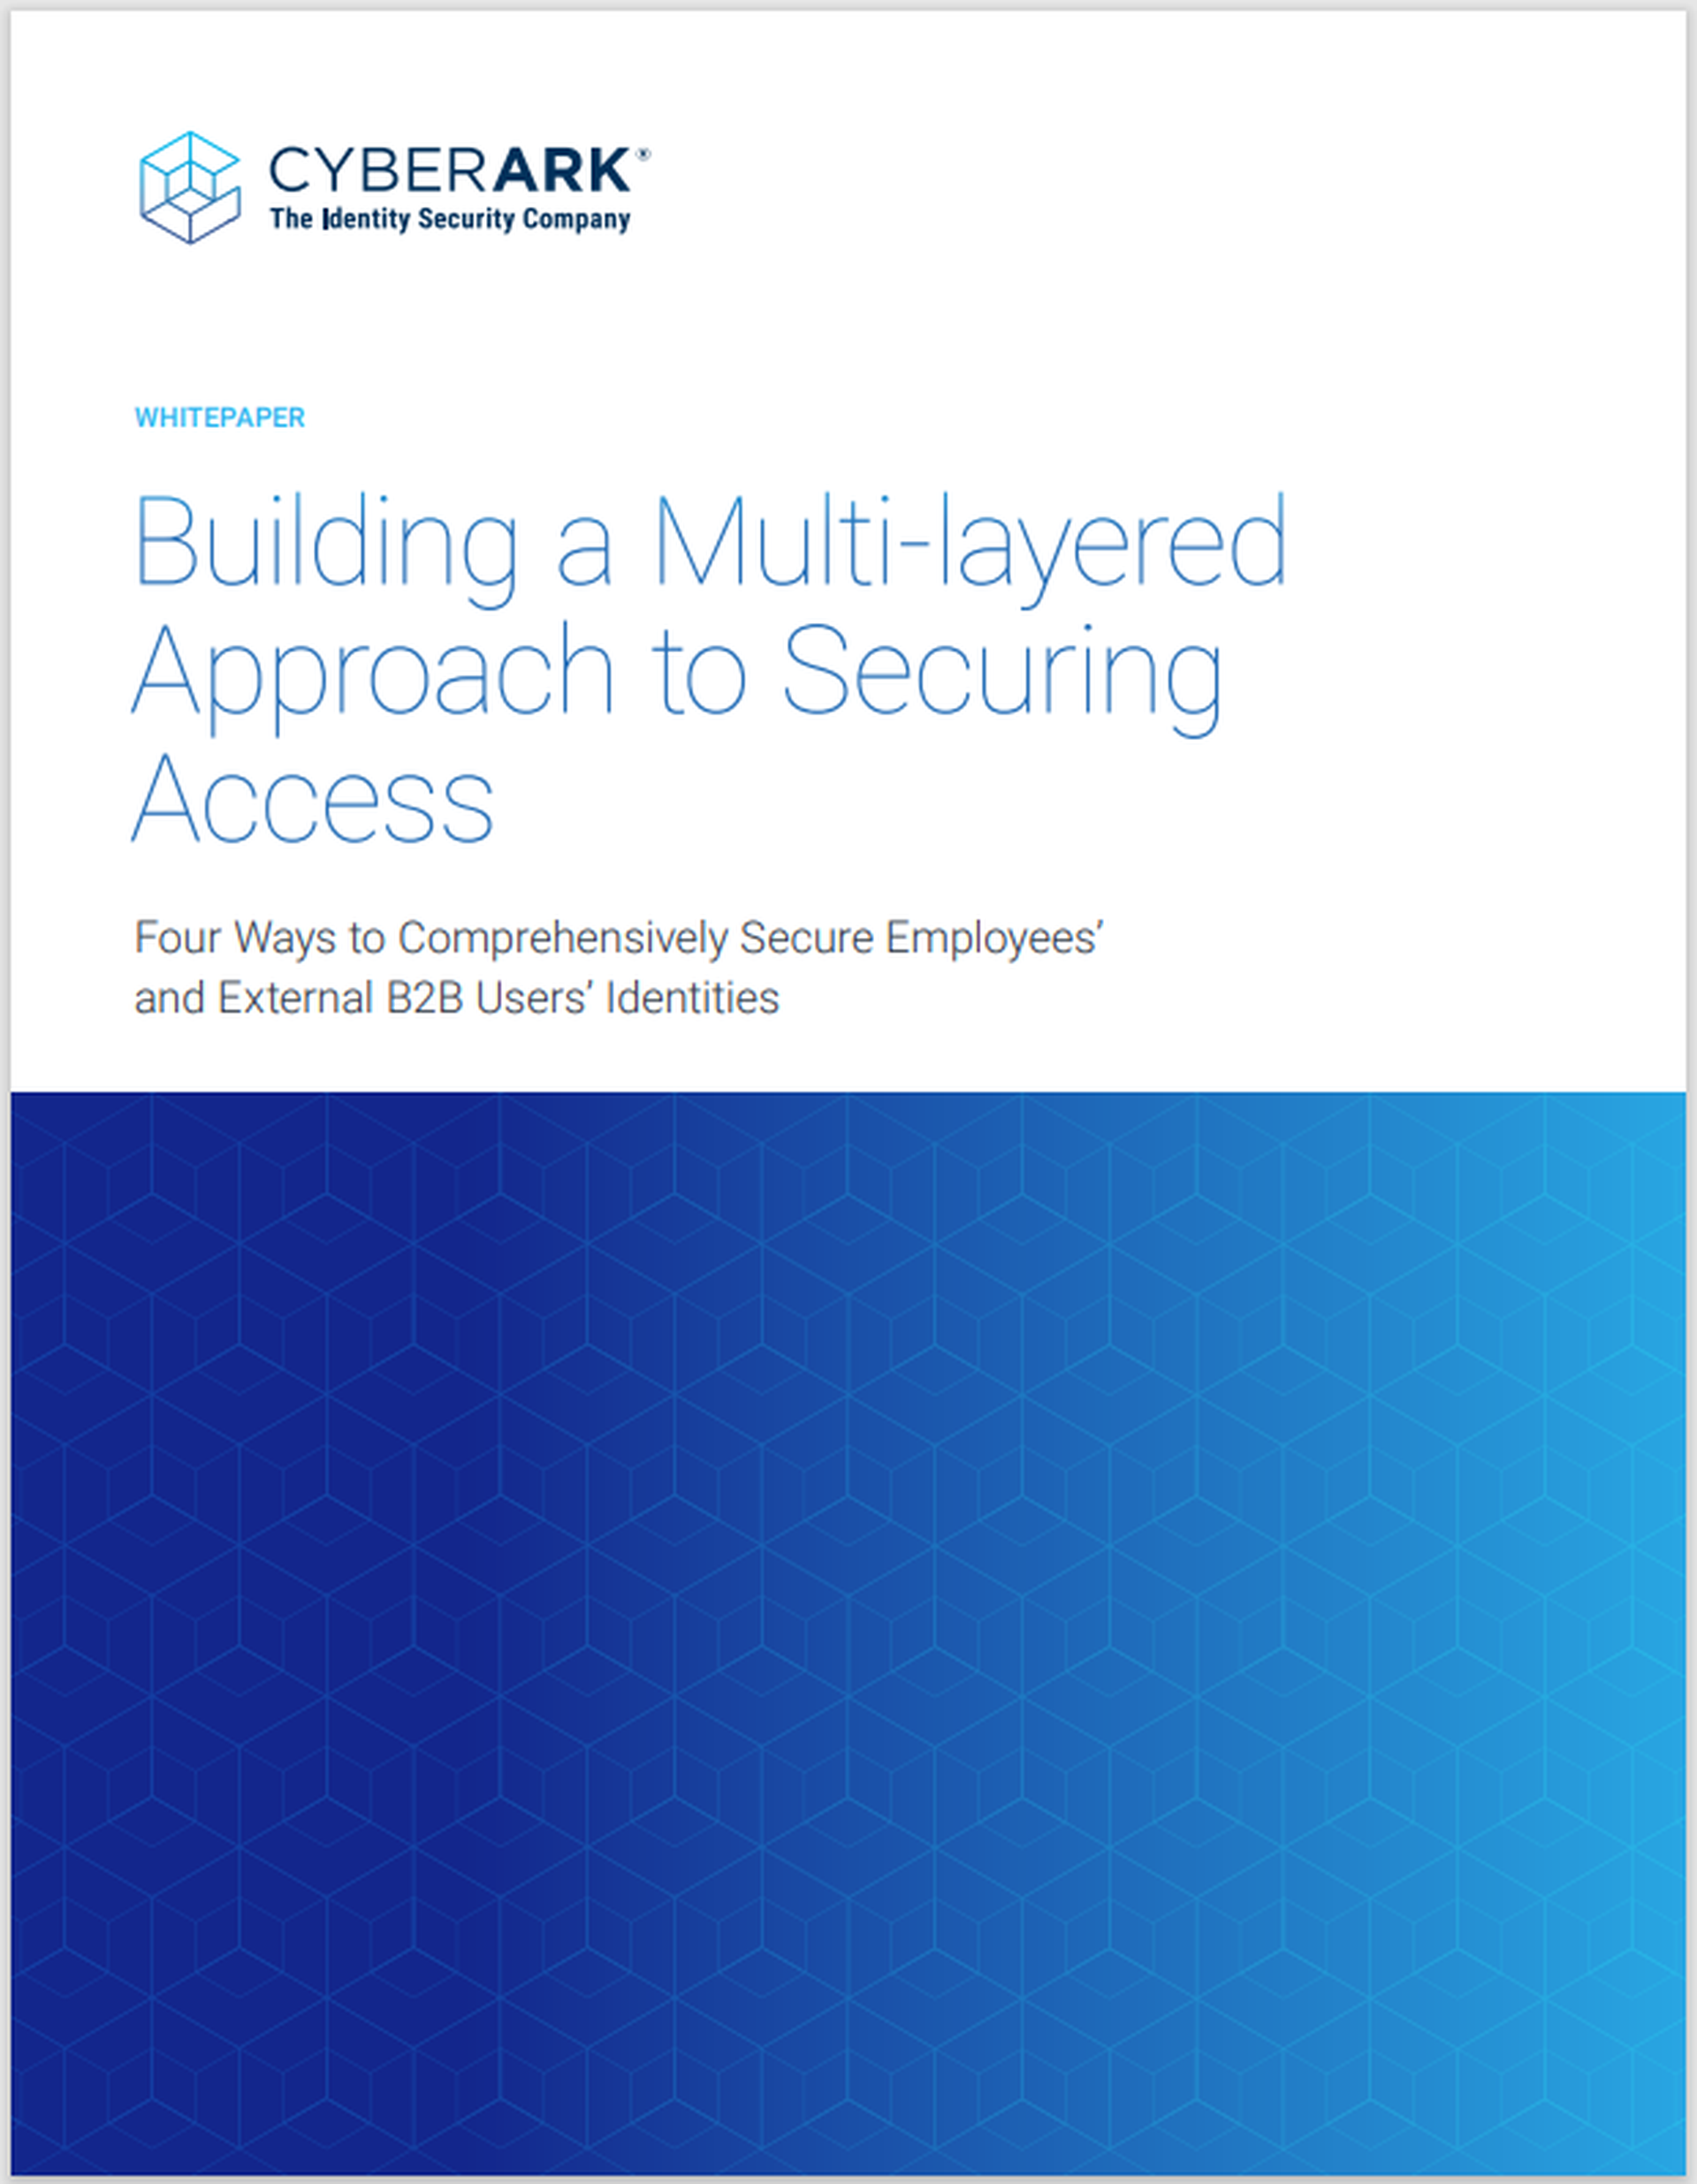 Building a Multi-layered Approach to Securing Access